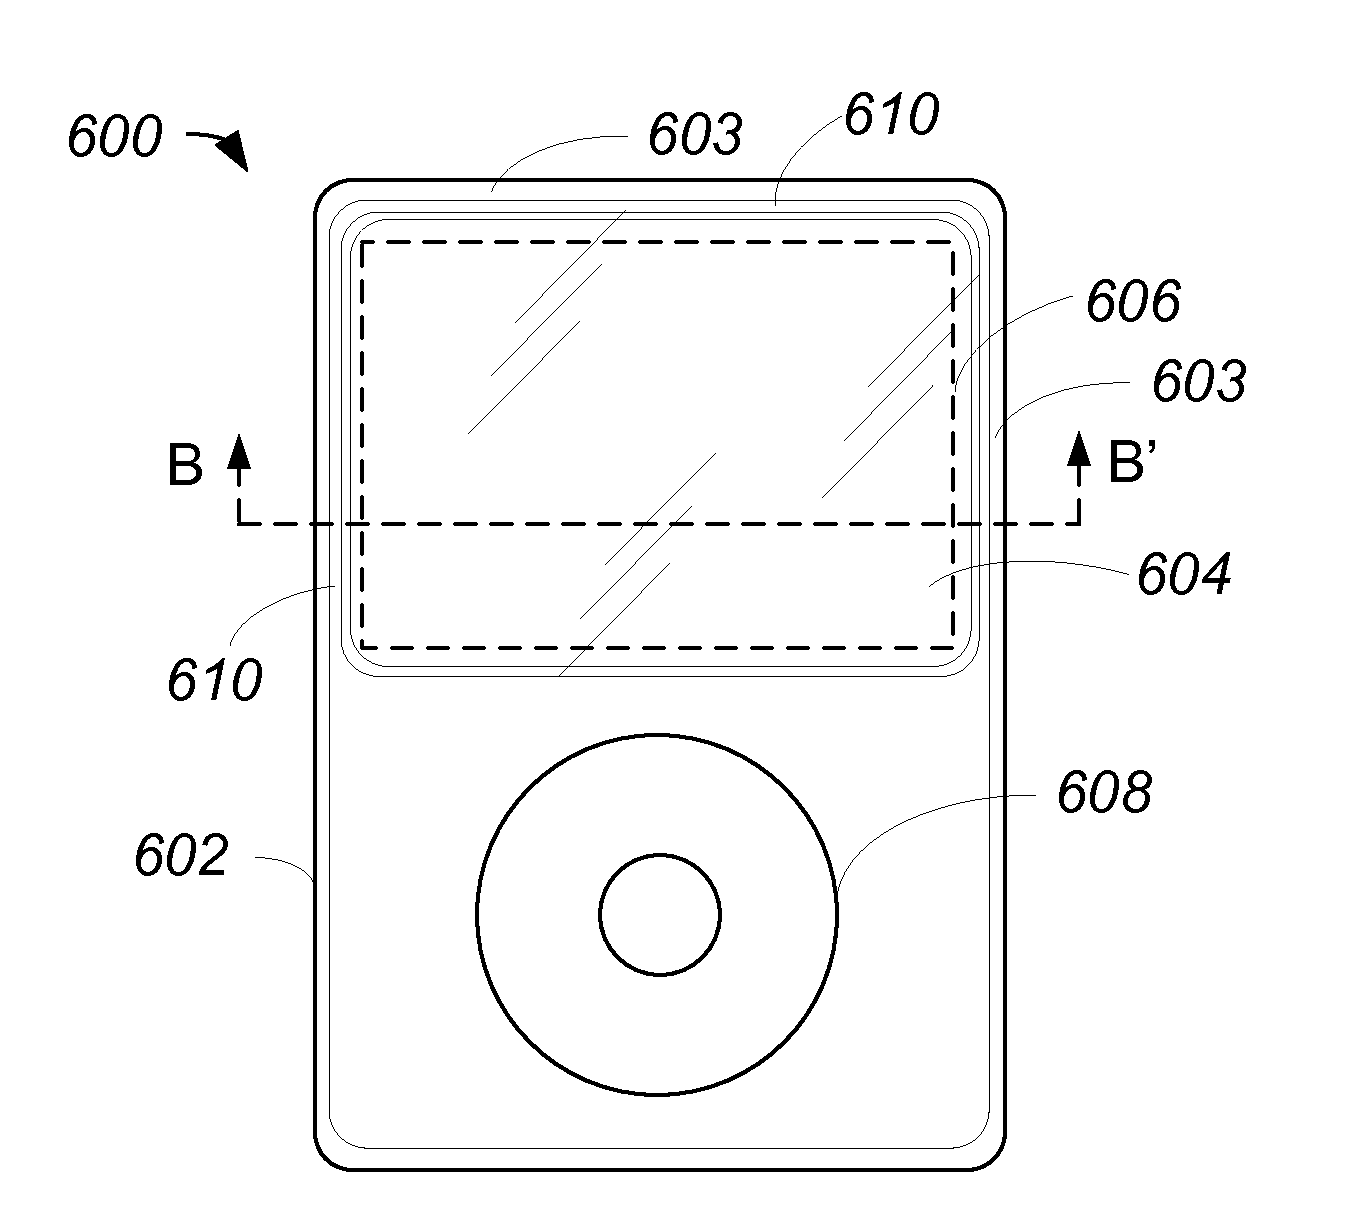 Enhanced chemical strengthening glass for portable electronic devices